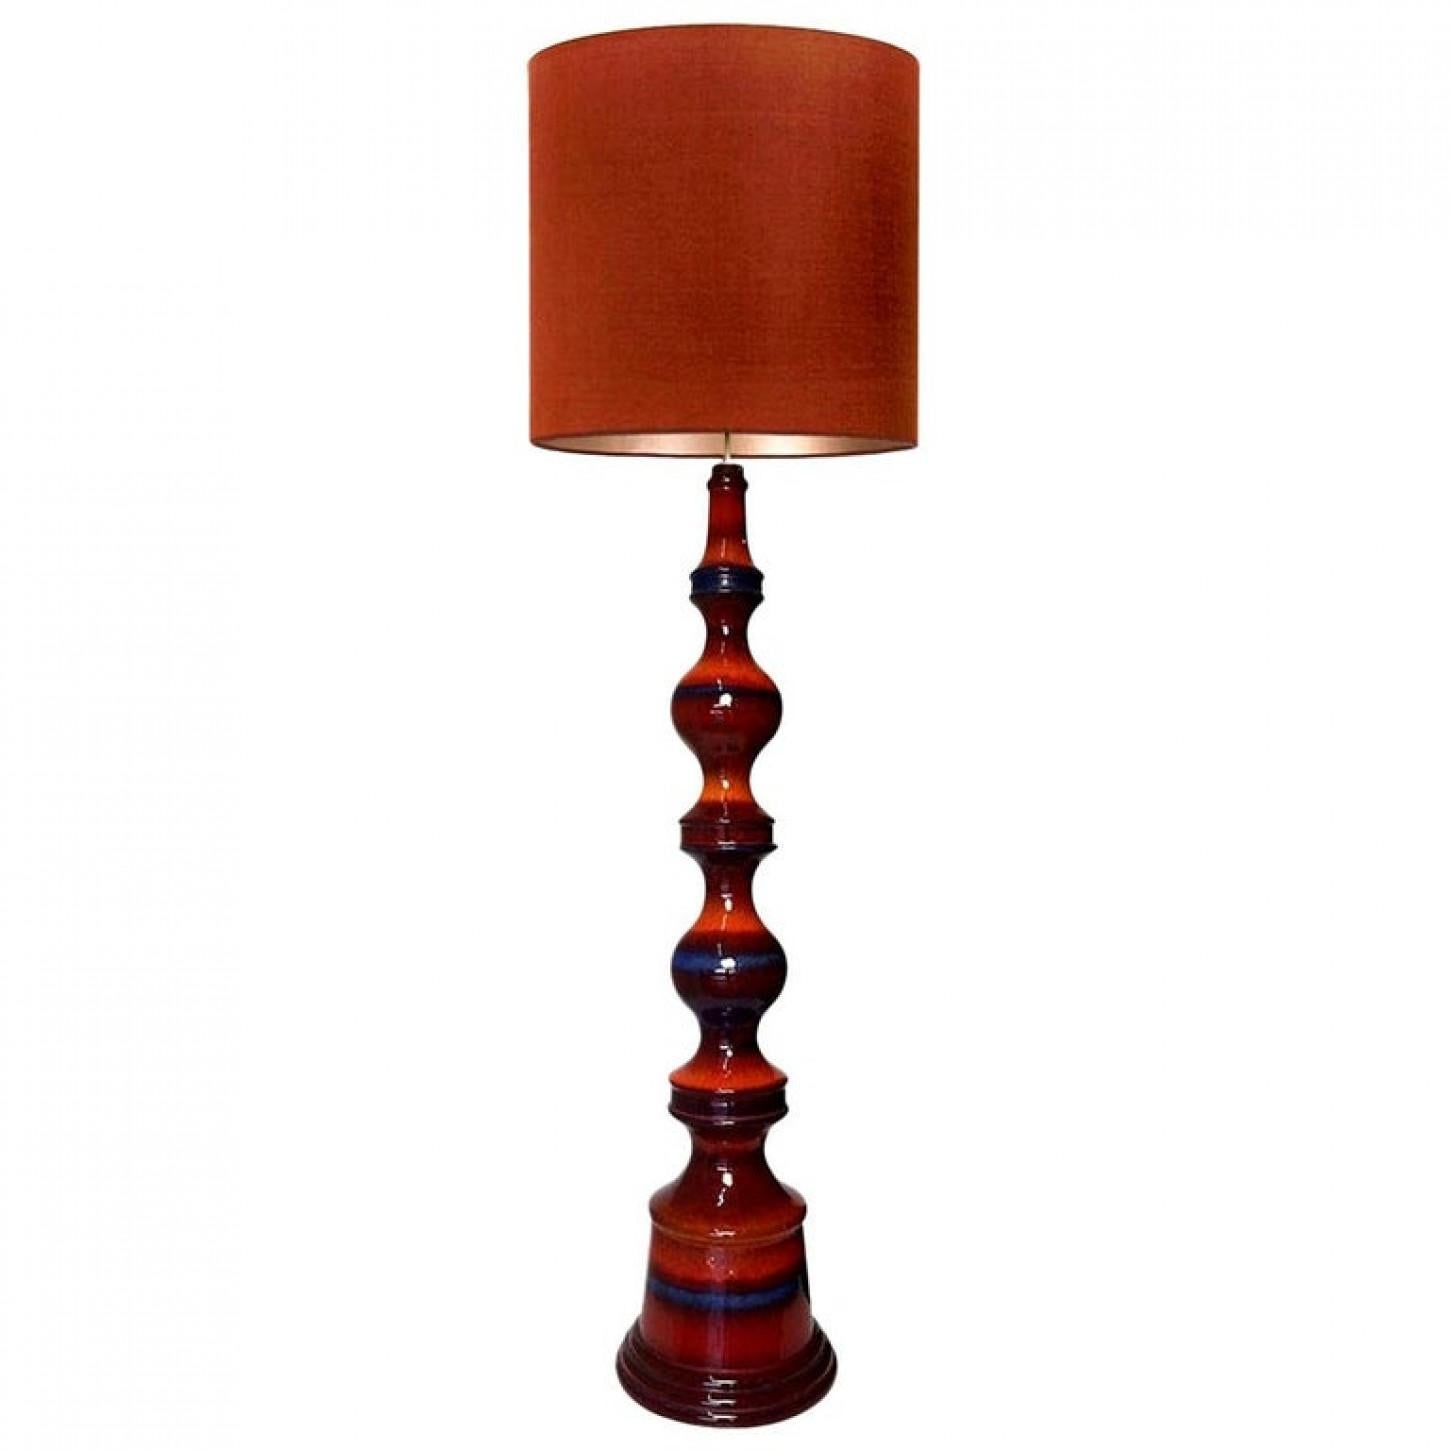 Exceptional large ceramic bubble floor lamp, Germany, 1960s. A sculptural high-end piece made of handmade ceramic in rich glazed dark red orange, brick and blue tones. With a new custom made silk lamp shade by René Houben and a warm bronze or gold